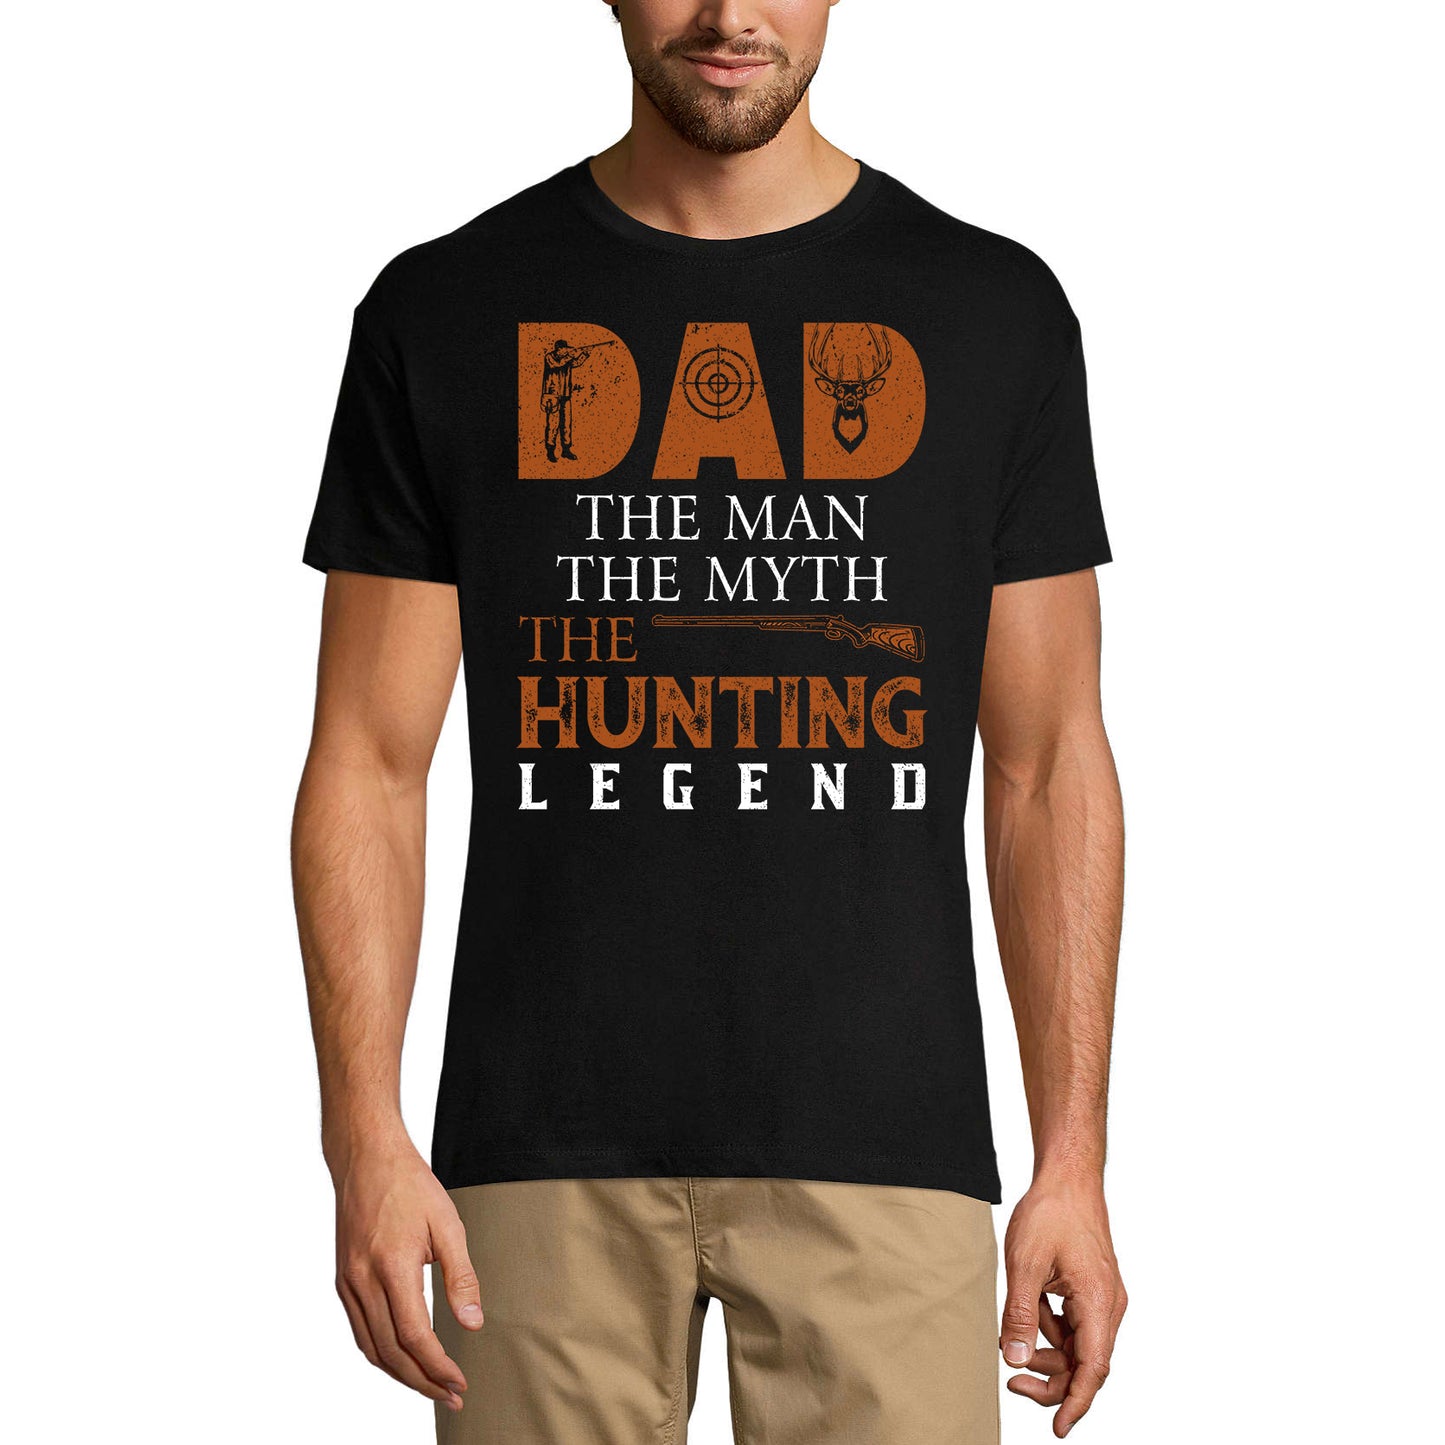 ULTRABASIC Graphic Men's T-Shirt Dad The Man The Myth The Hunting Legend - Funny Hunter's Tee Shirt